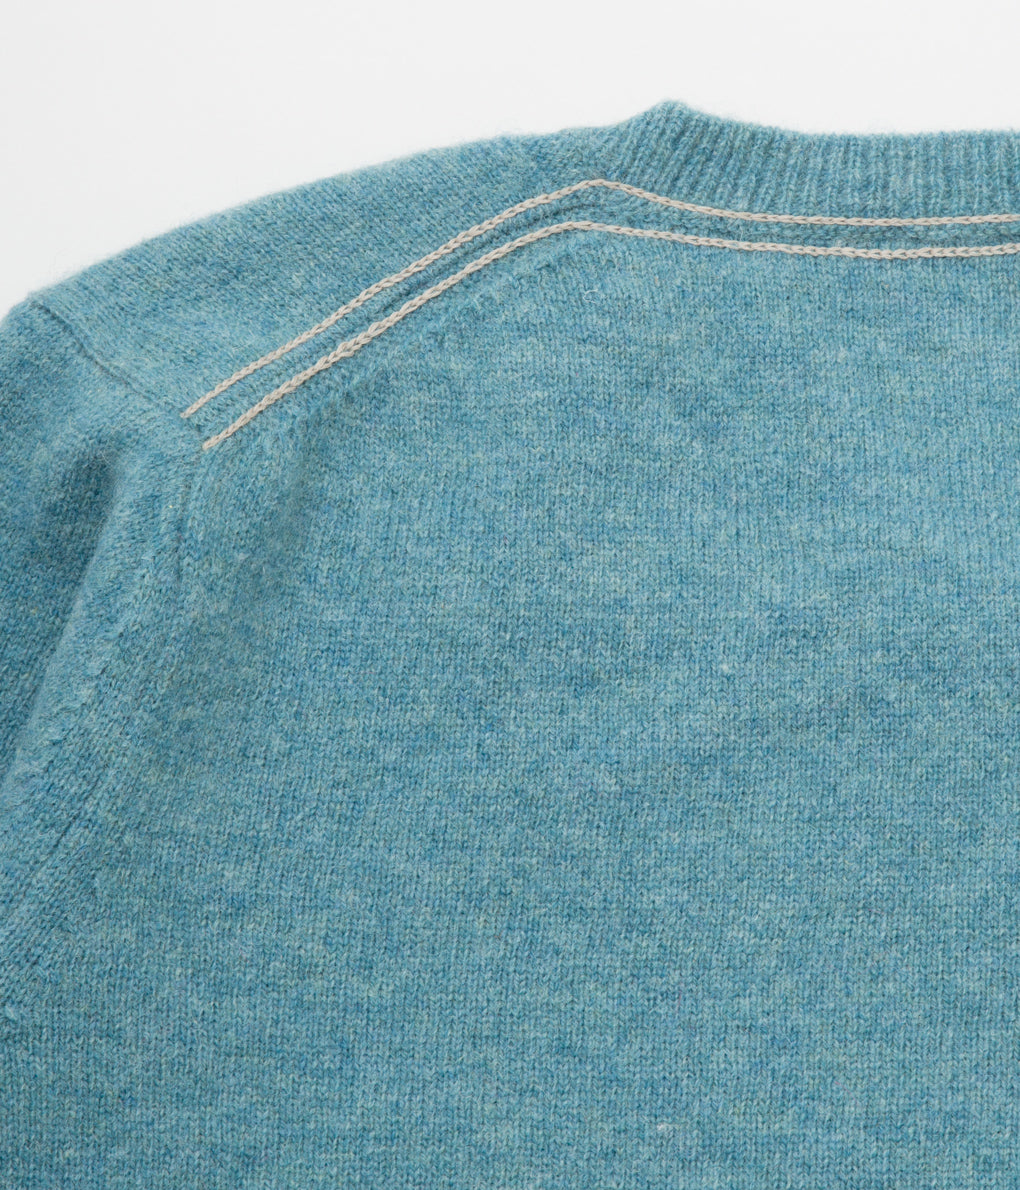 ANSNAM "CREWNECK KNIT with PATCH"(OASIS)